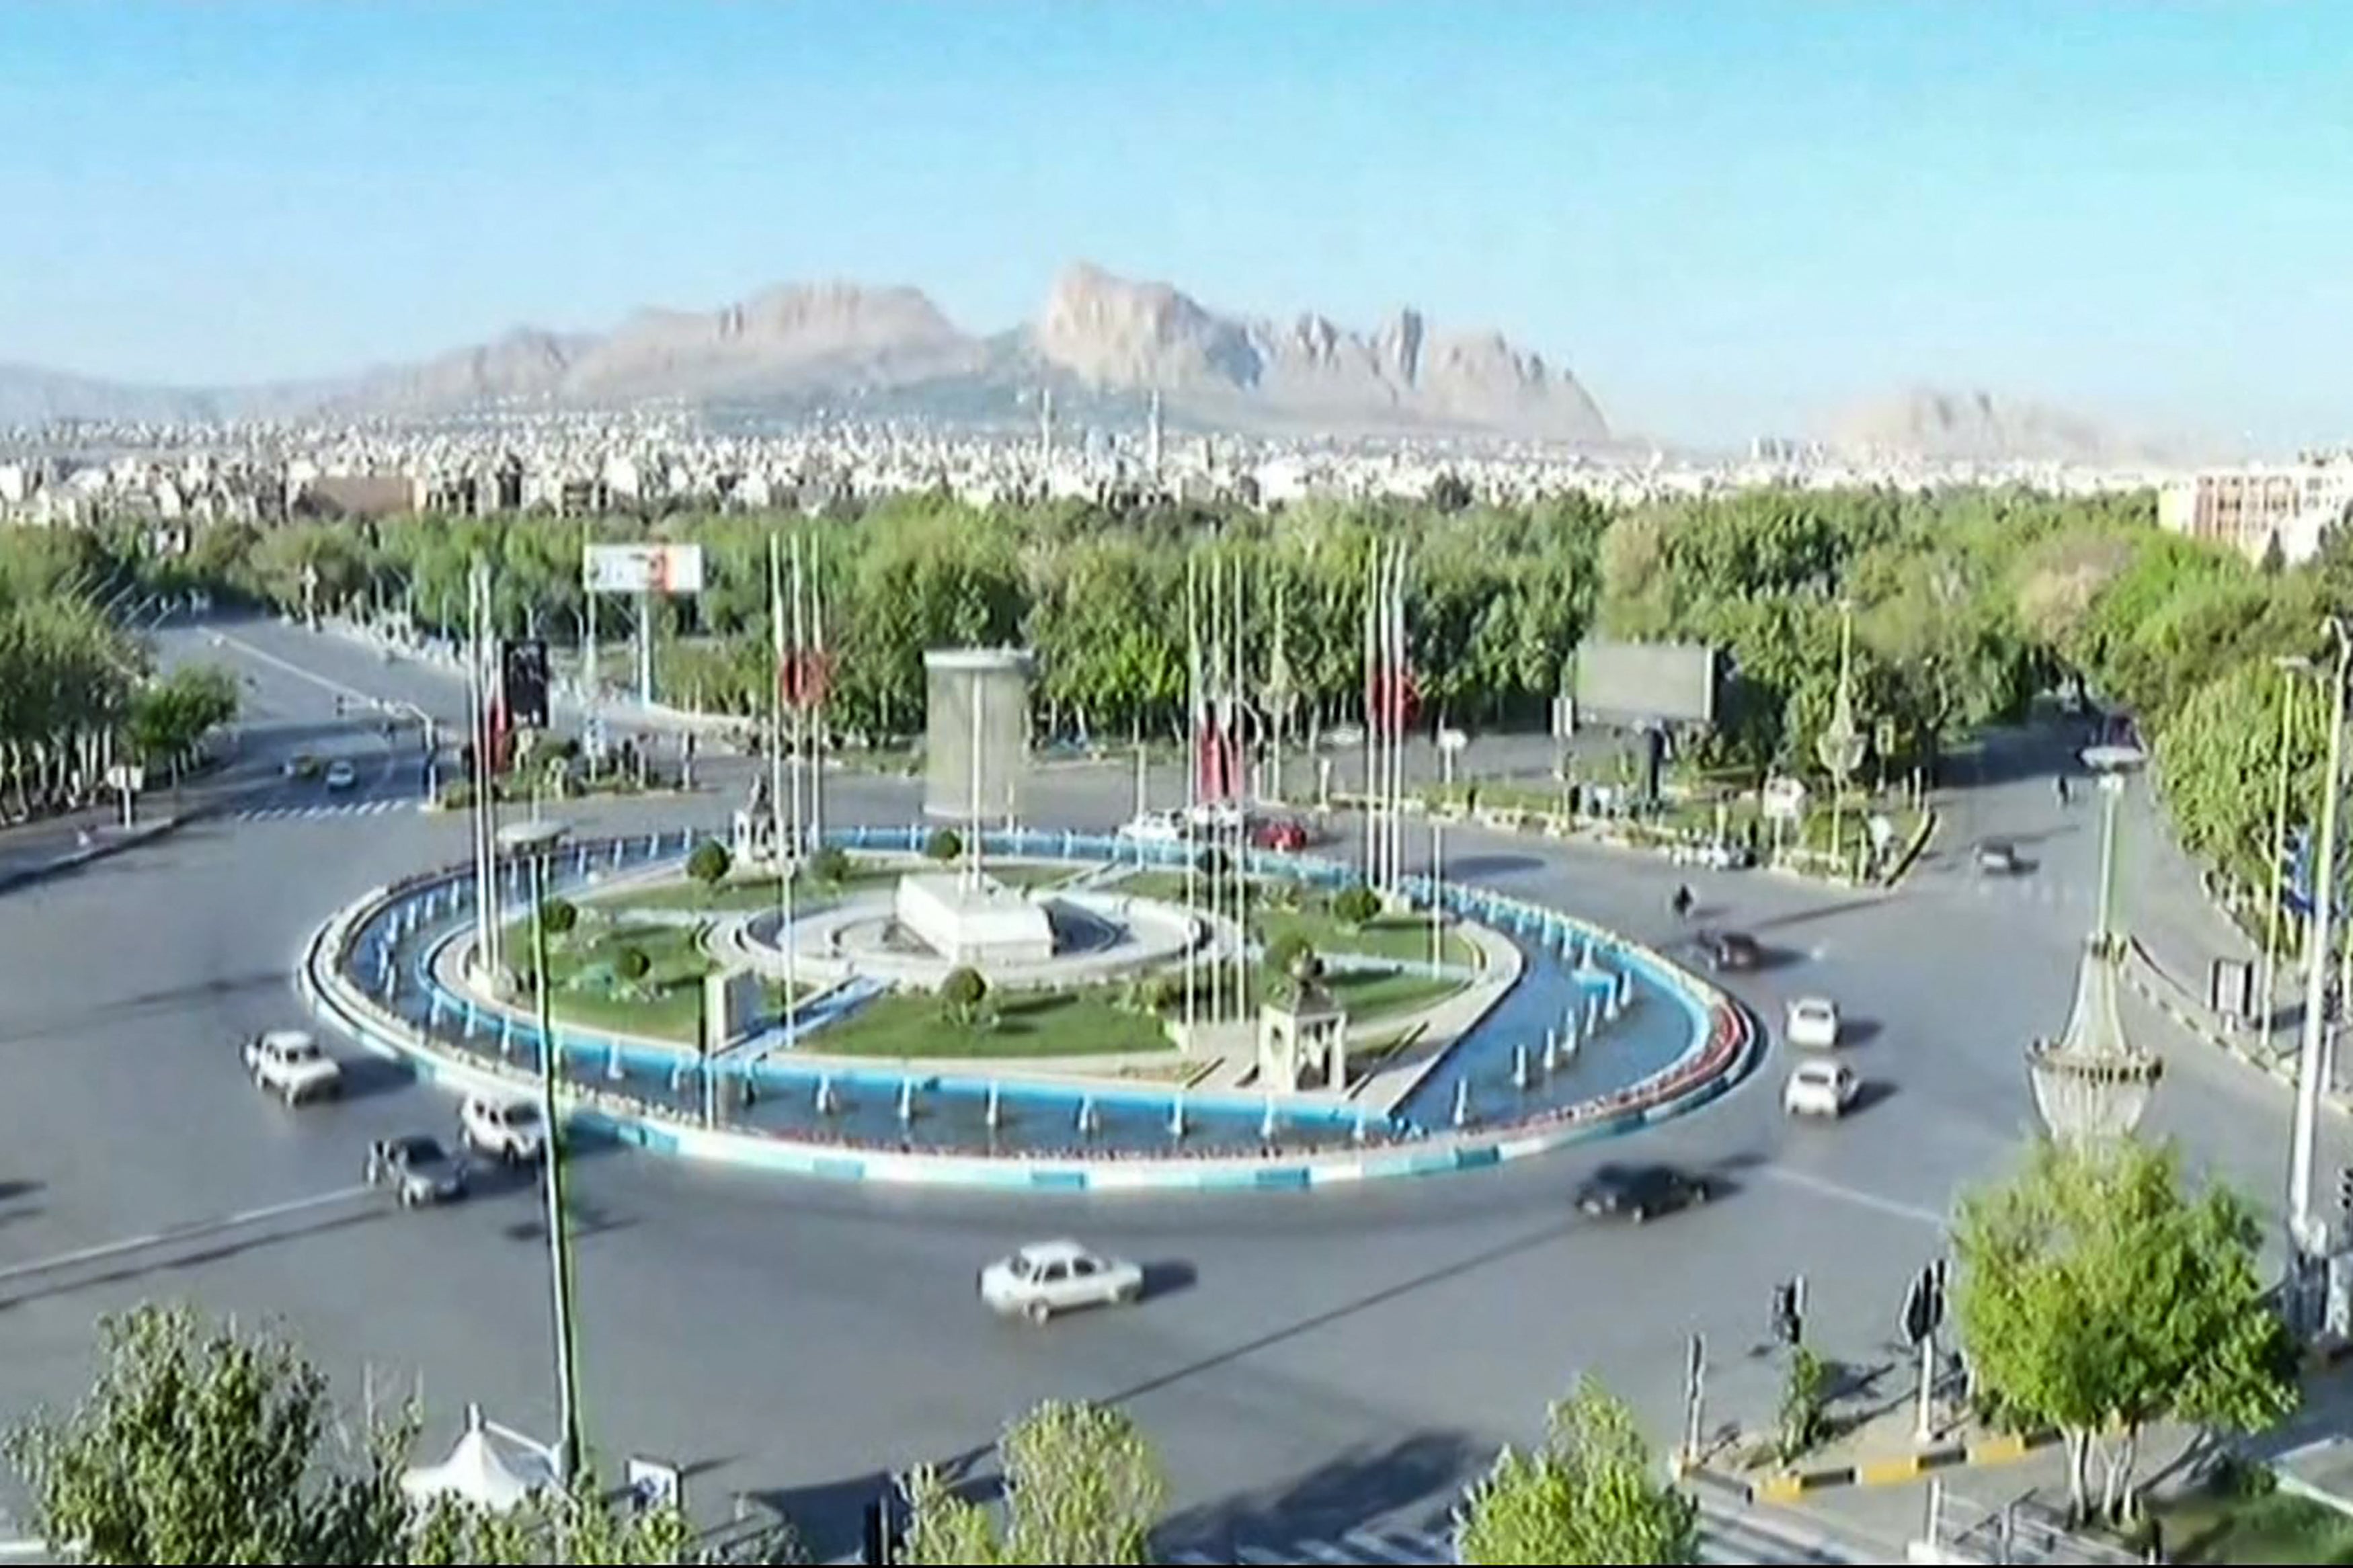 Iranian state TV ran what they said was a live picture of the city of Isfahan early on 19 April